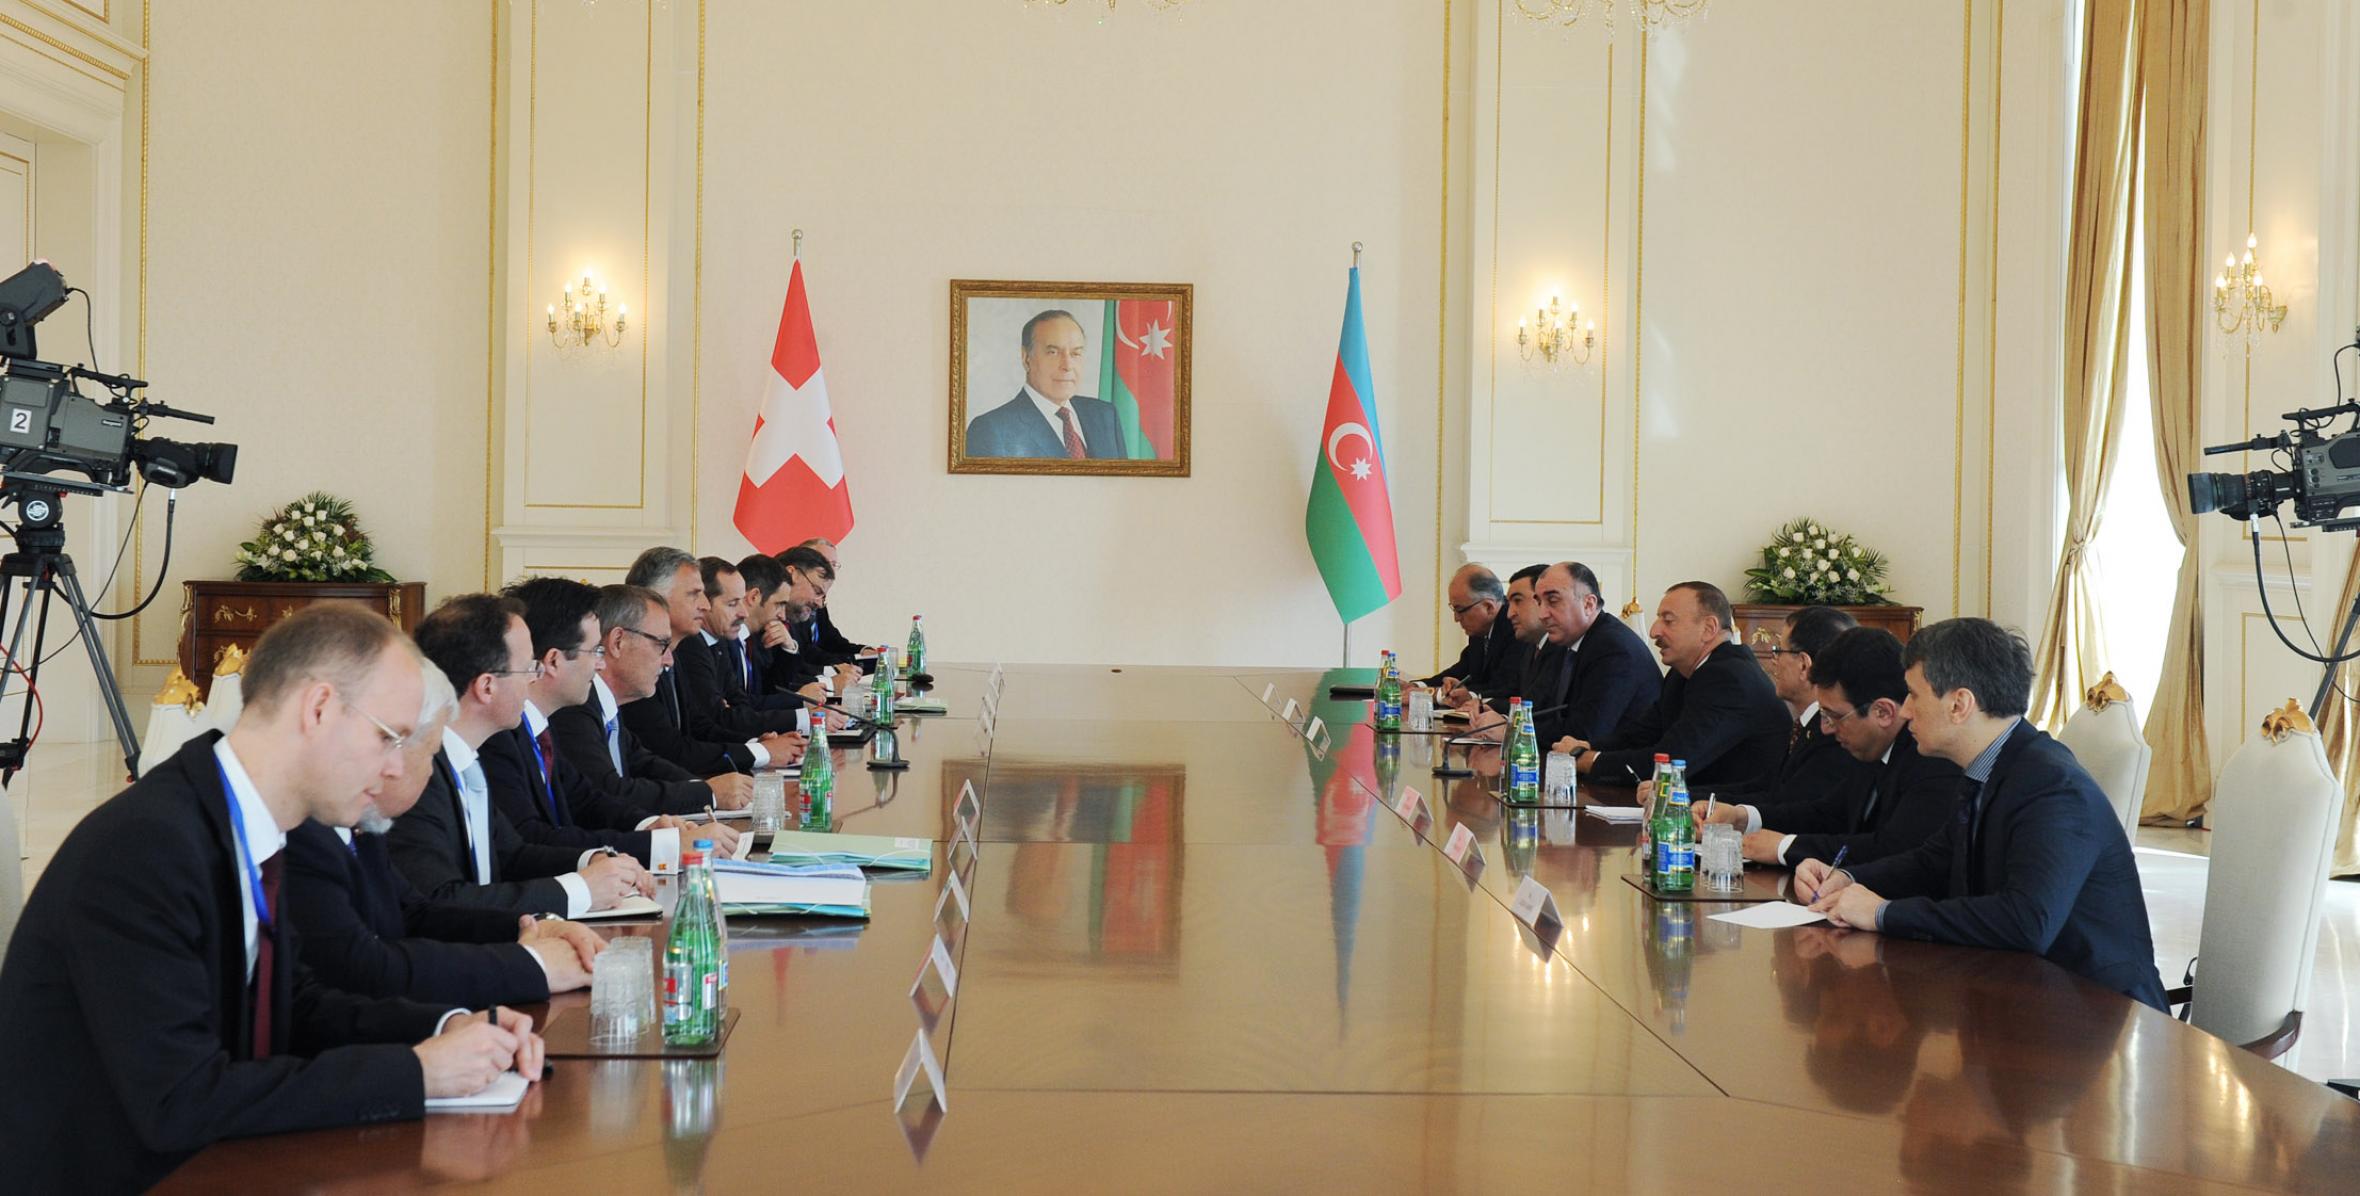 Ilham Aliyev and President of the Swiss Confederation Didier Burkhalter met in an expanded format